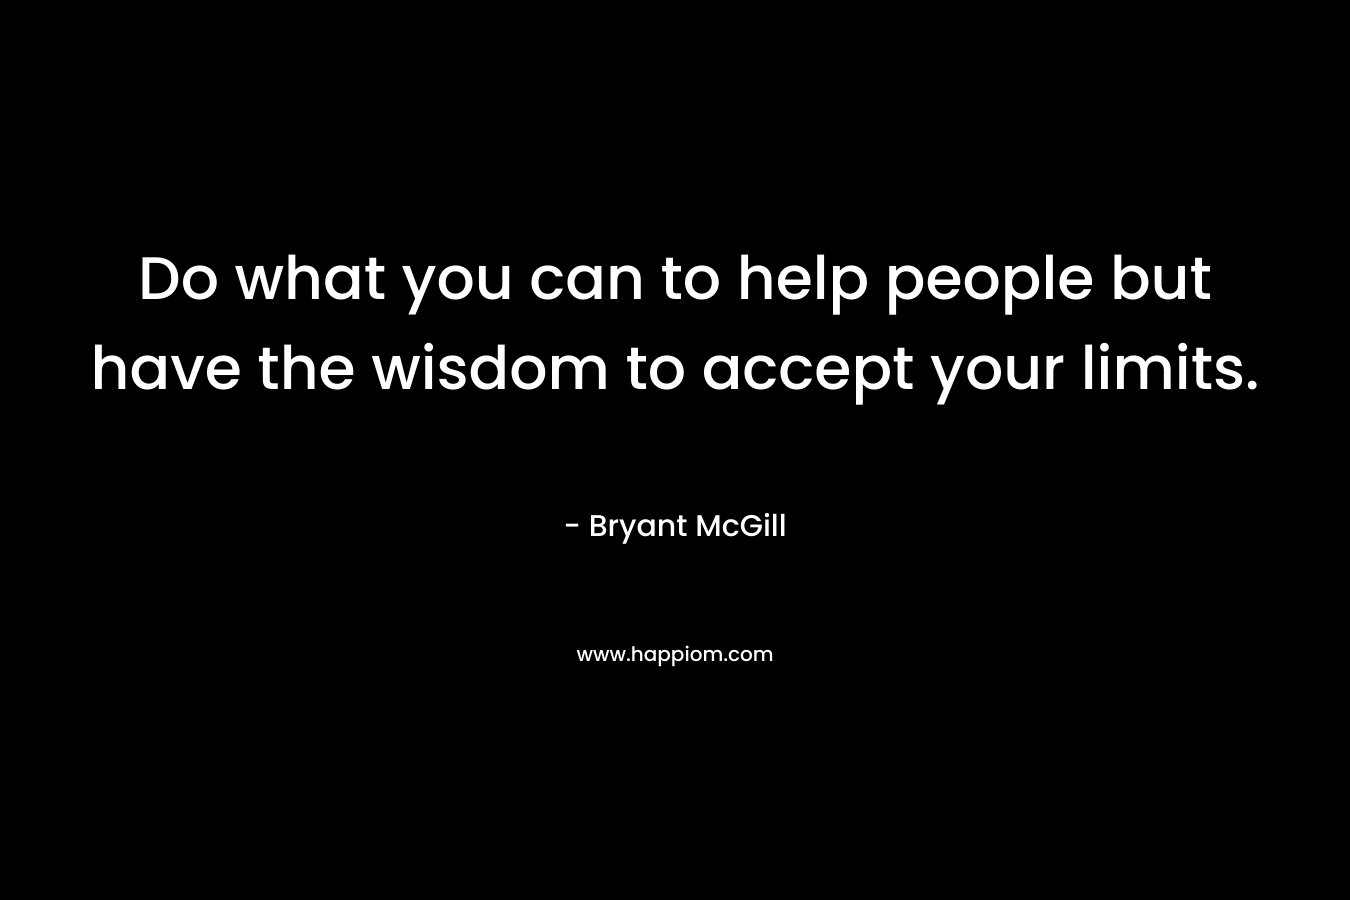 Do what you can to help people but have the wisdom to accept your limits. – Bryant McGill